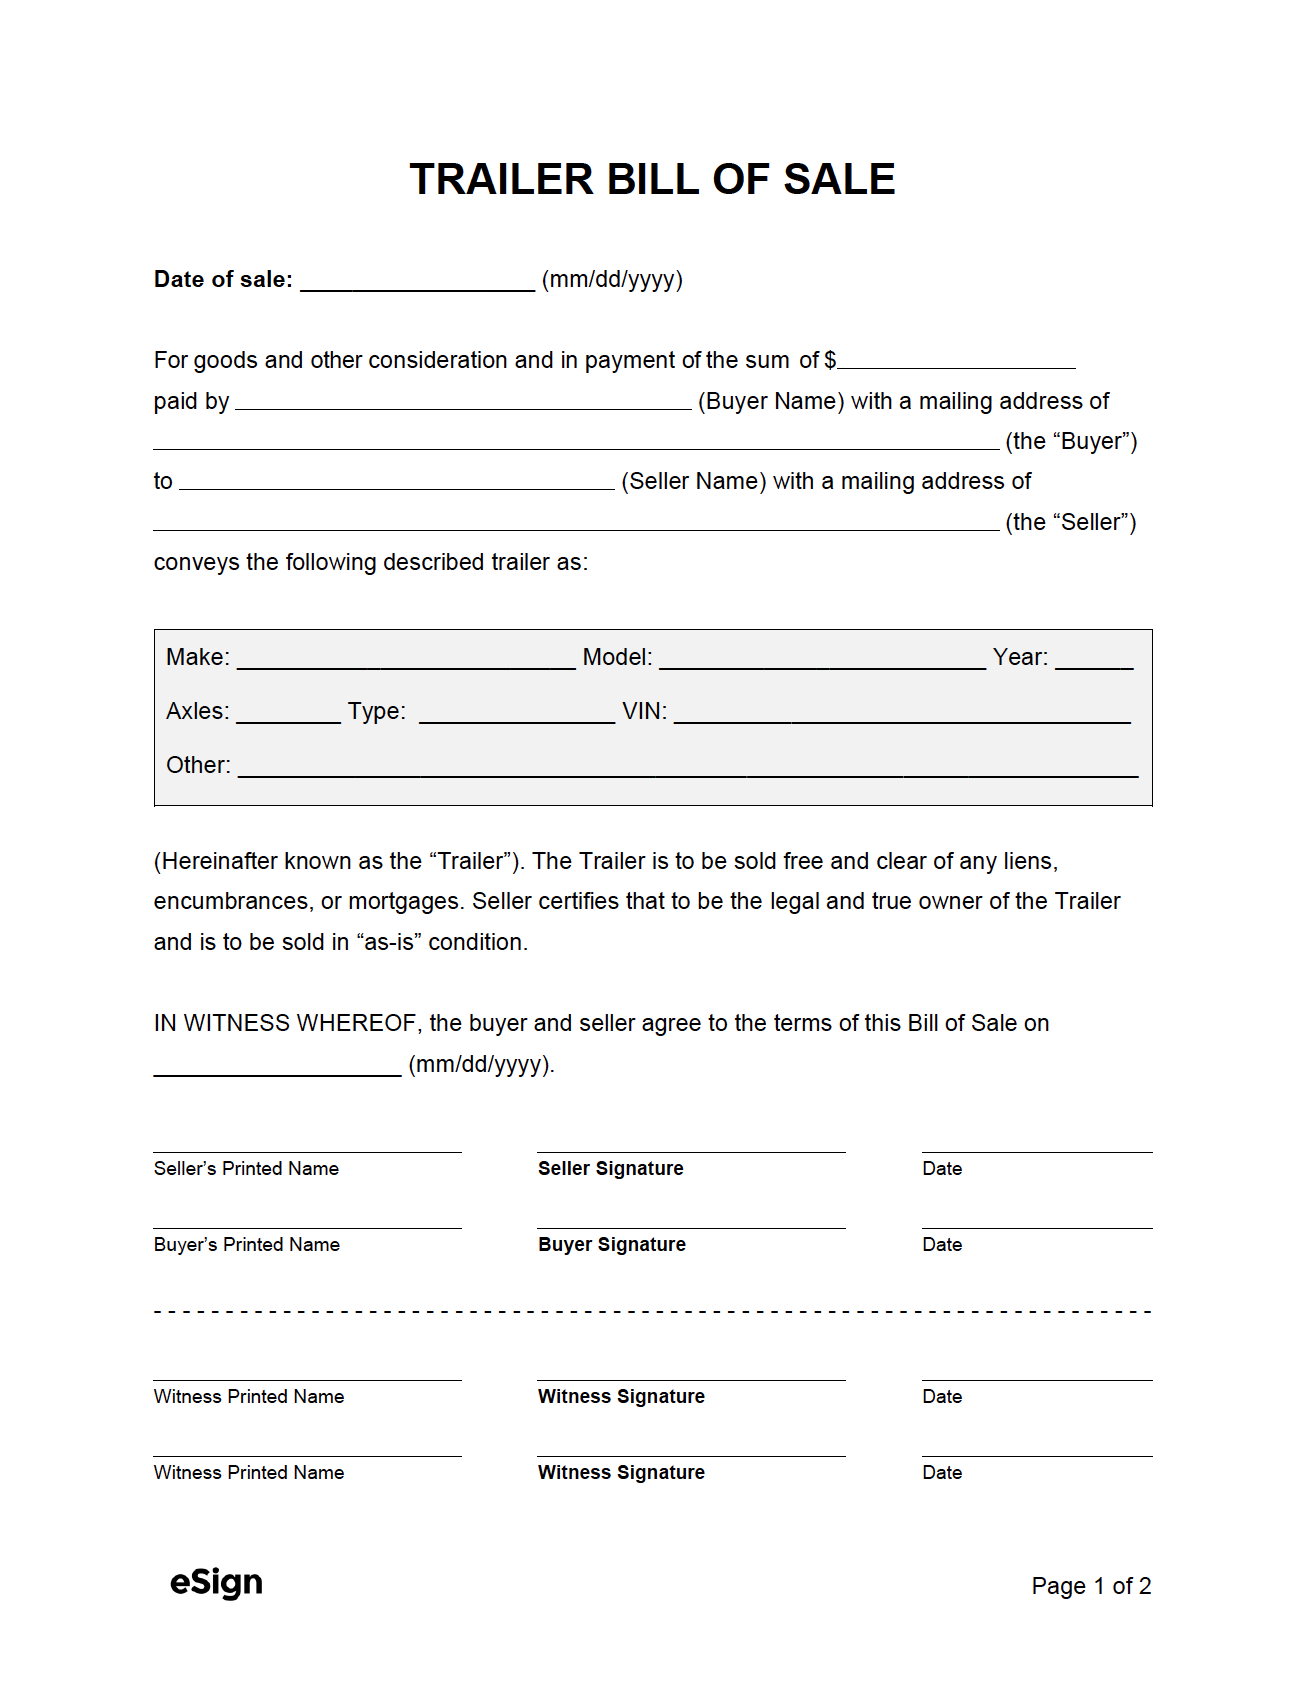 Free Trailer Bill Of Sale Form | Pdf | Word with Free Printable Bill Of Sale For Trailer